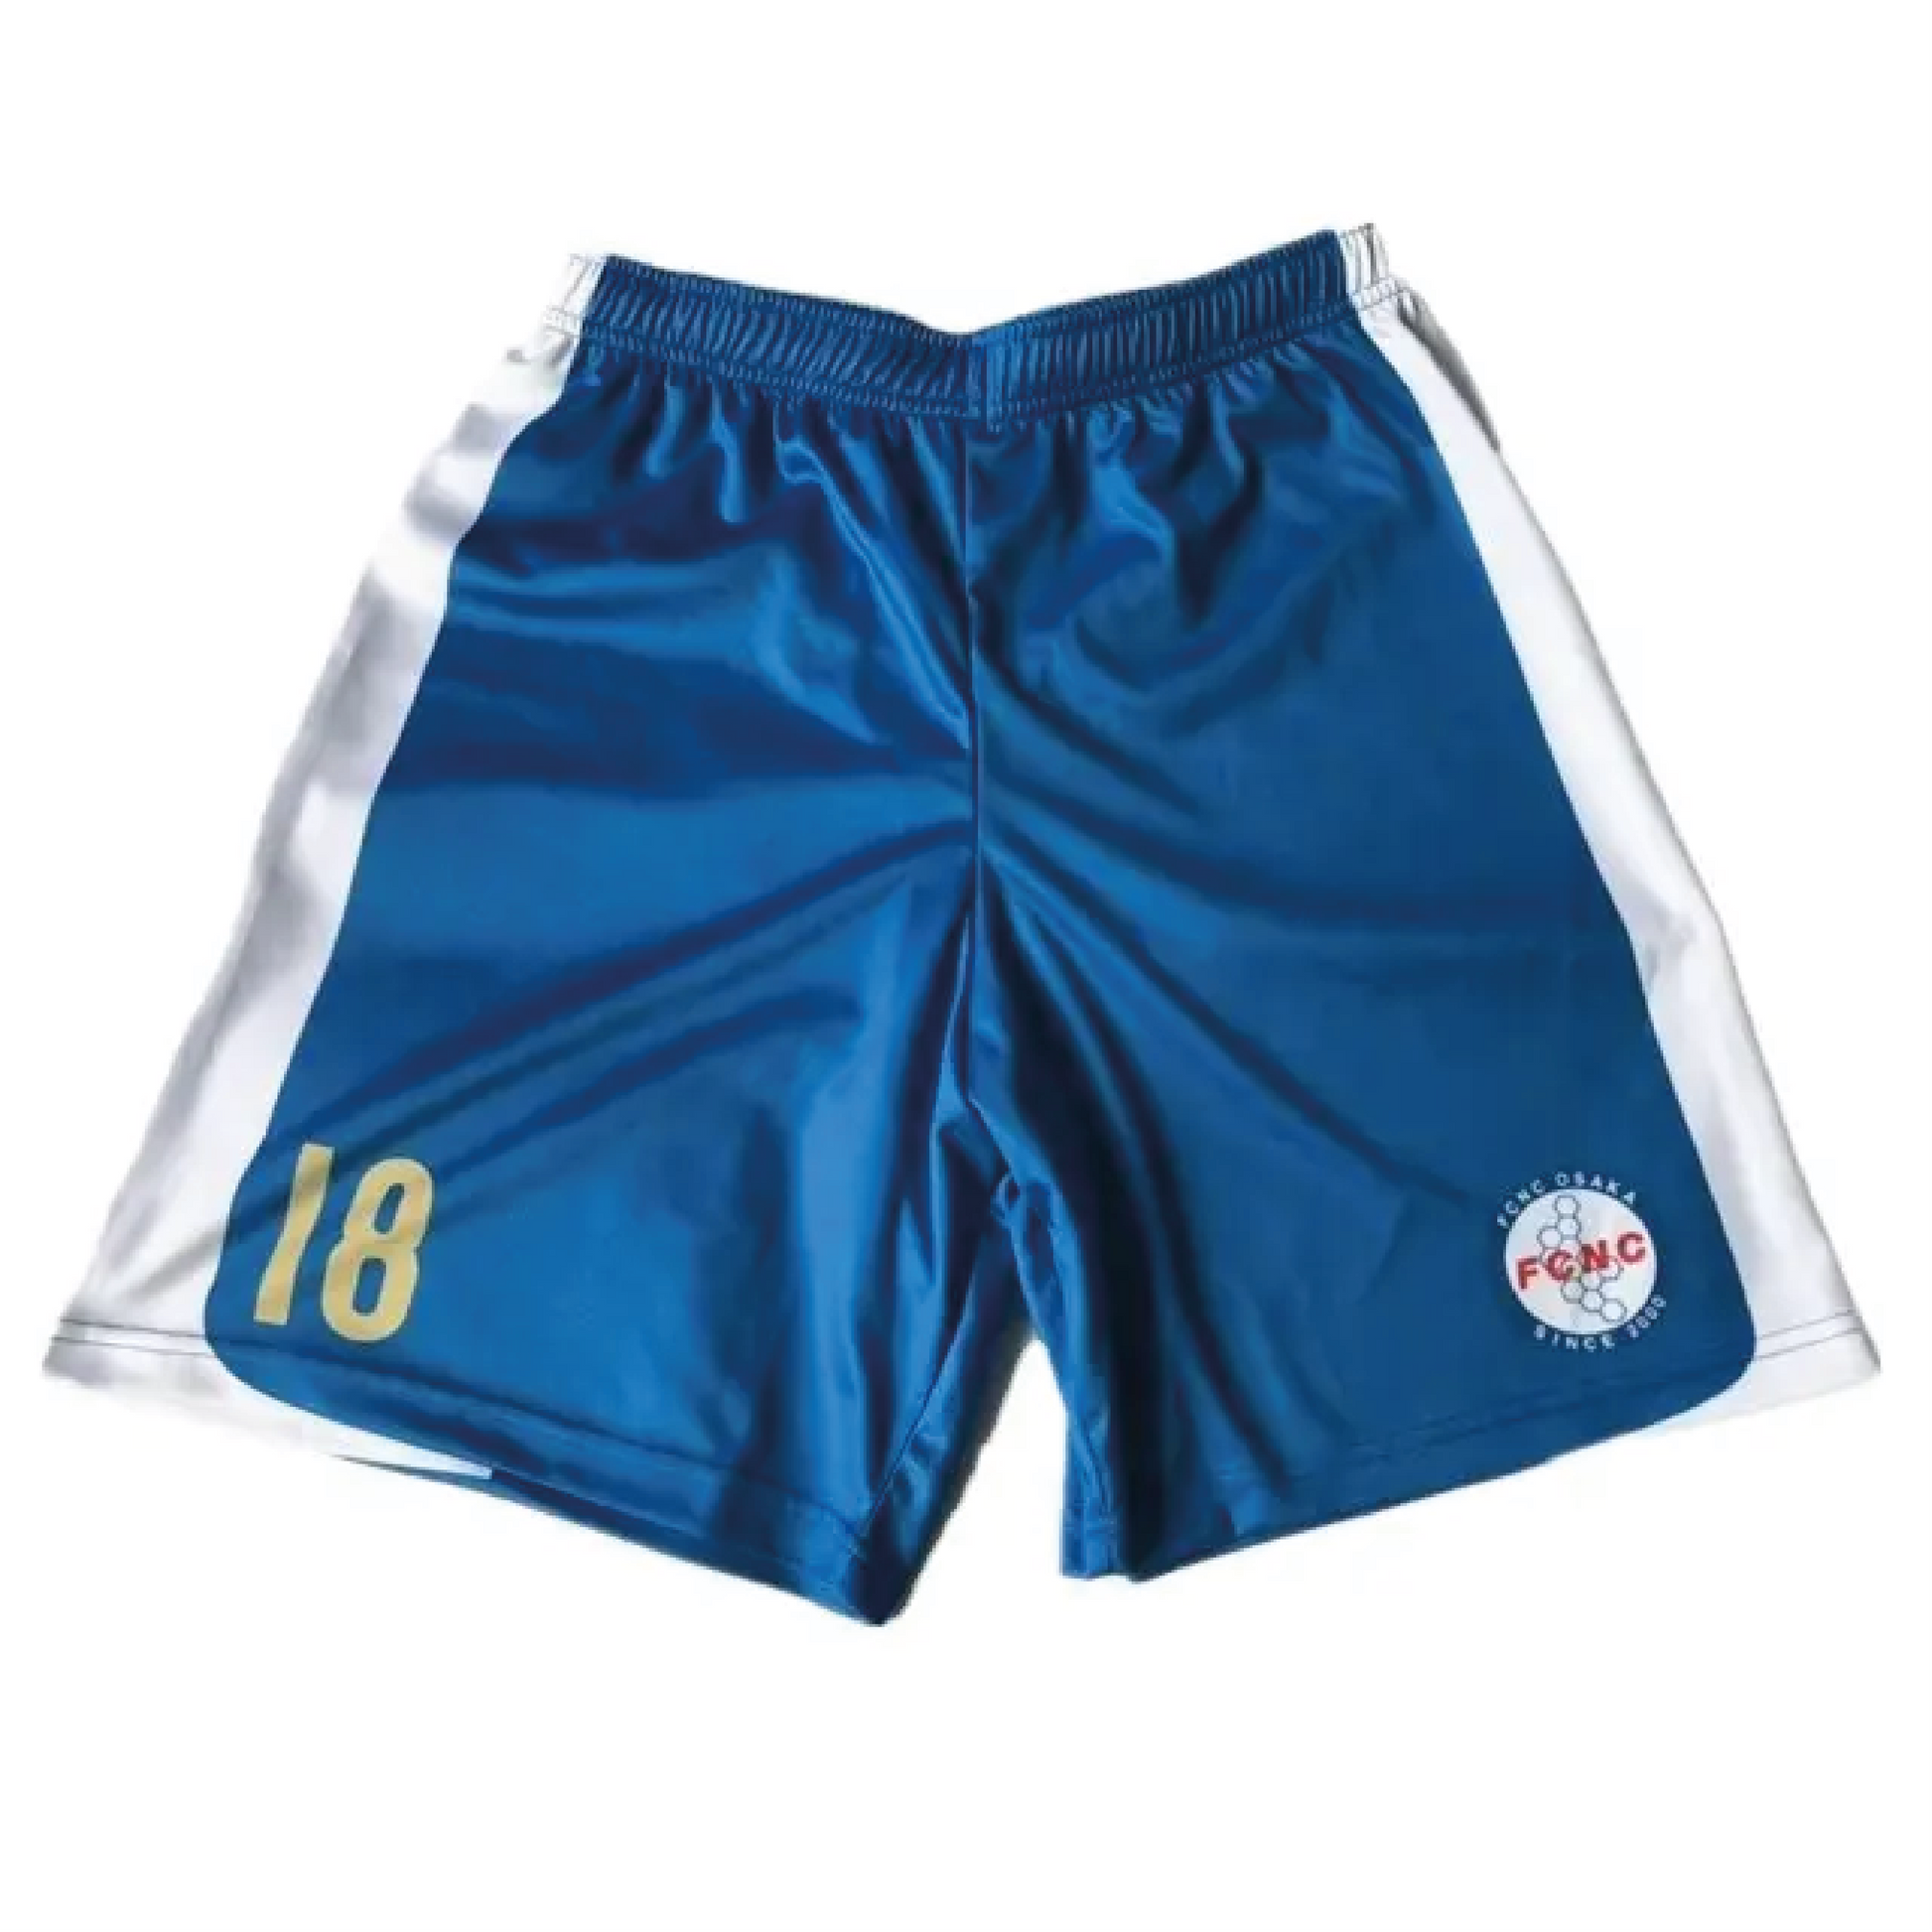 Adults Football Shorts – Flags Banners Displays